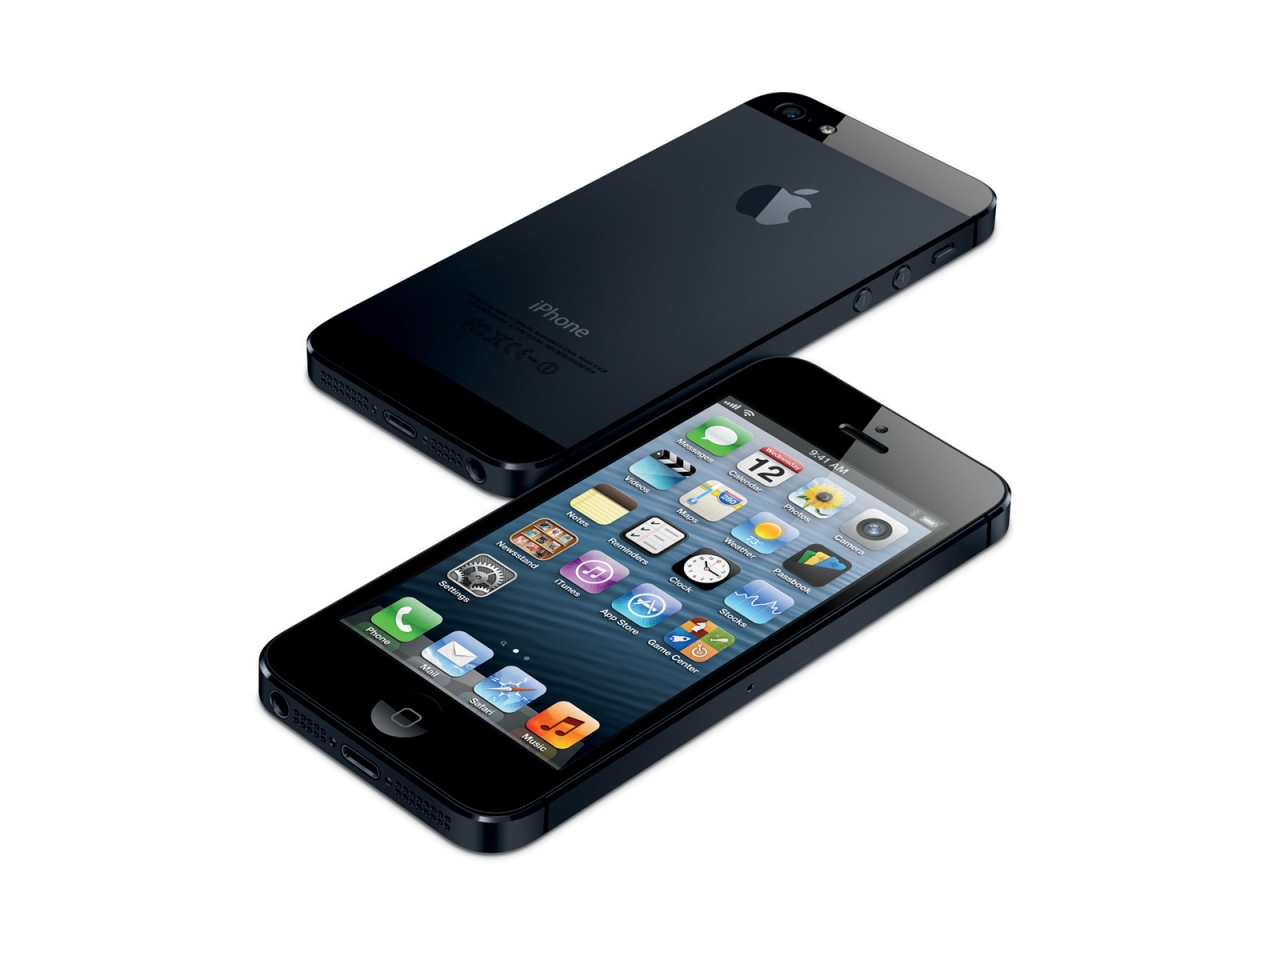 Black iPhone 5 for 1280 x 960 resolution